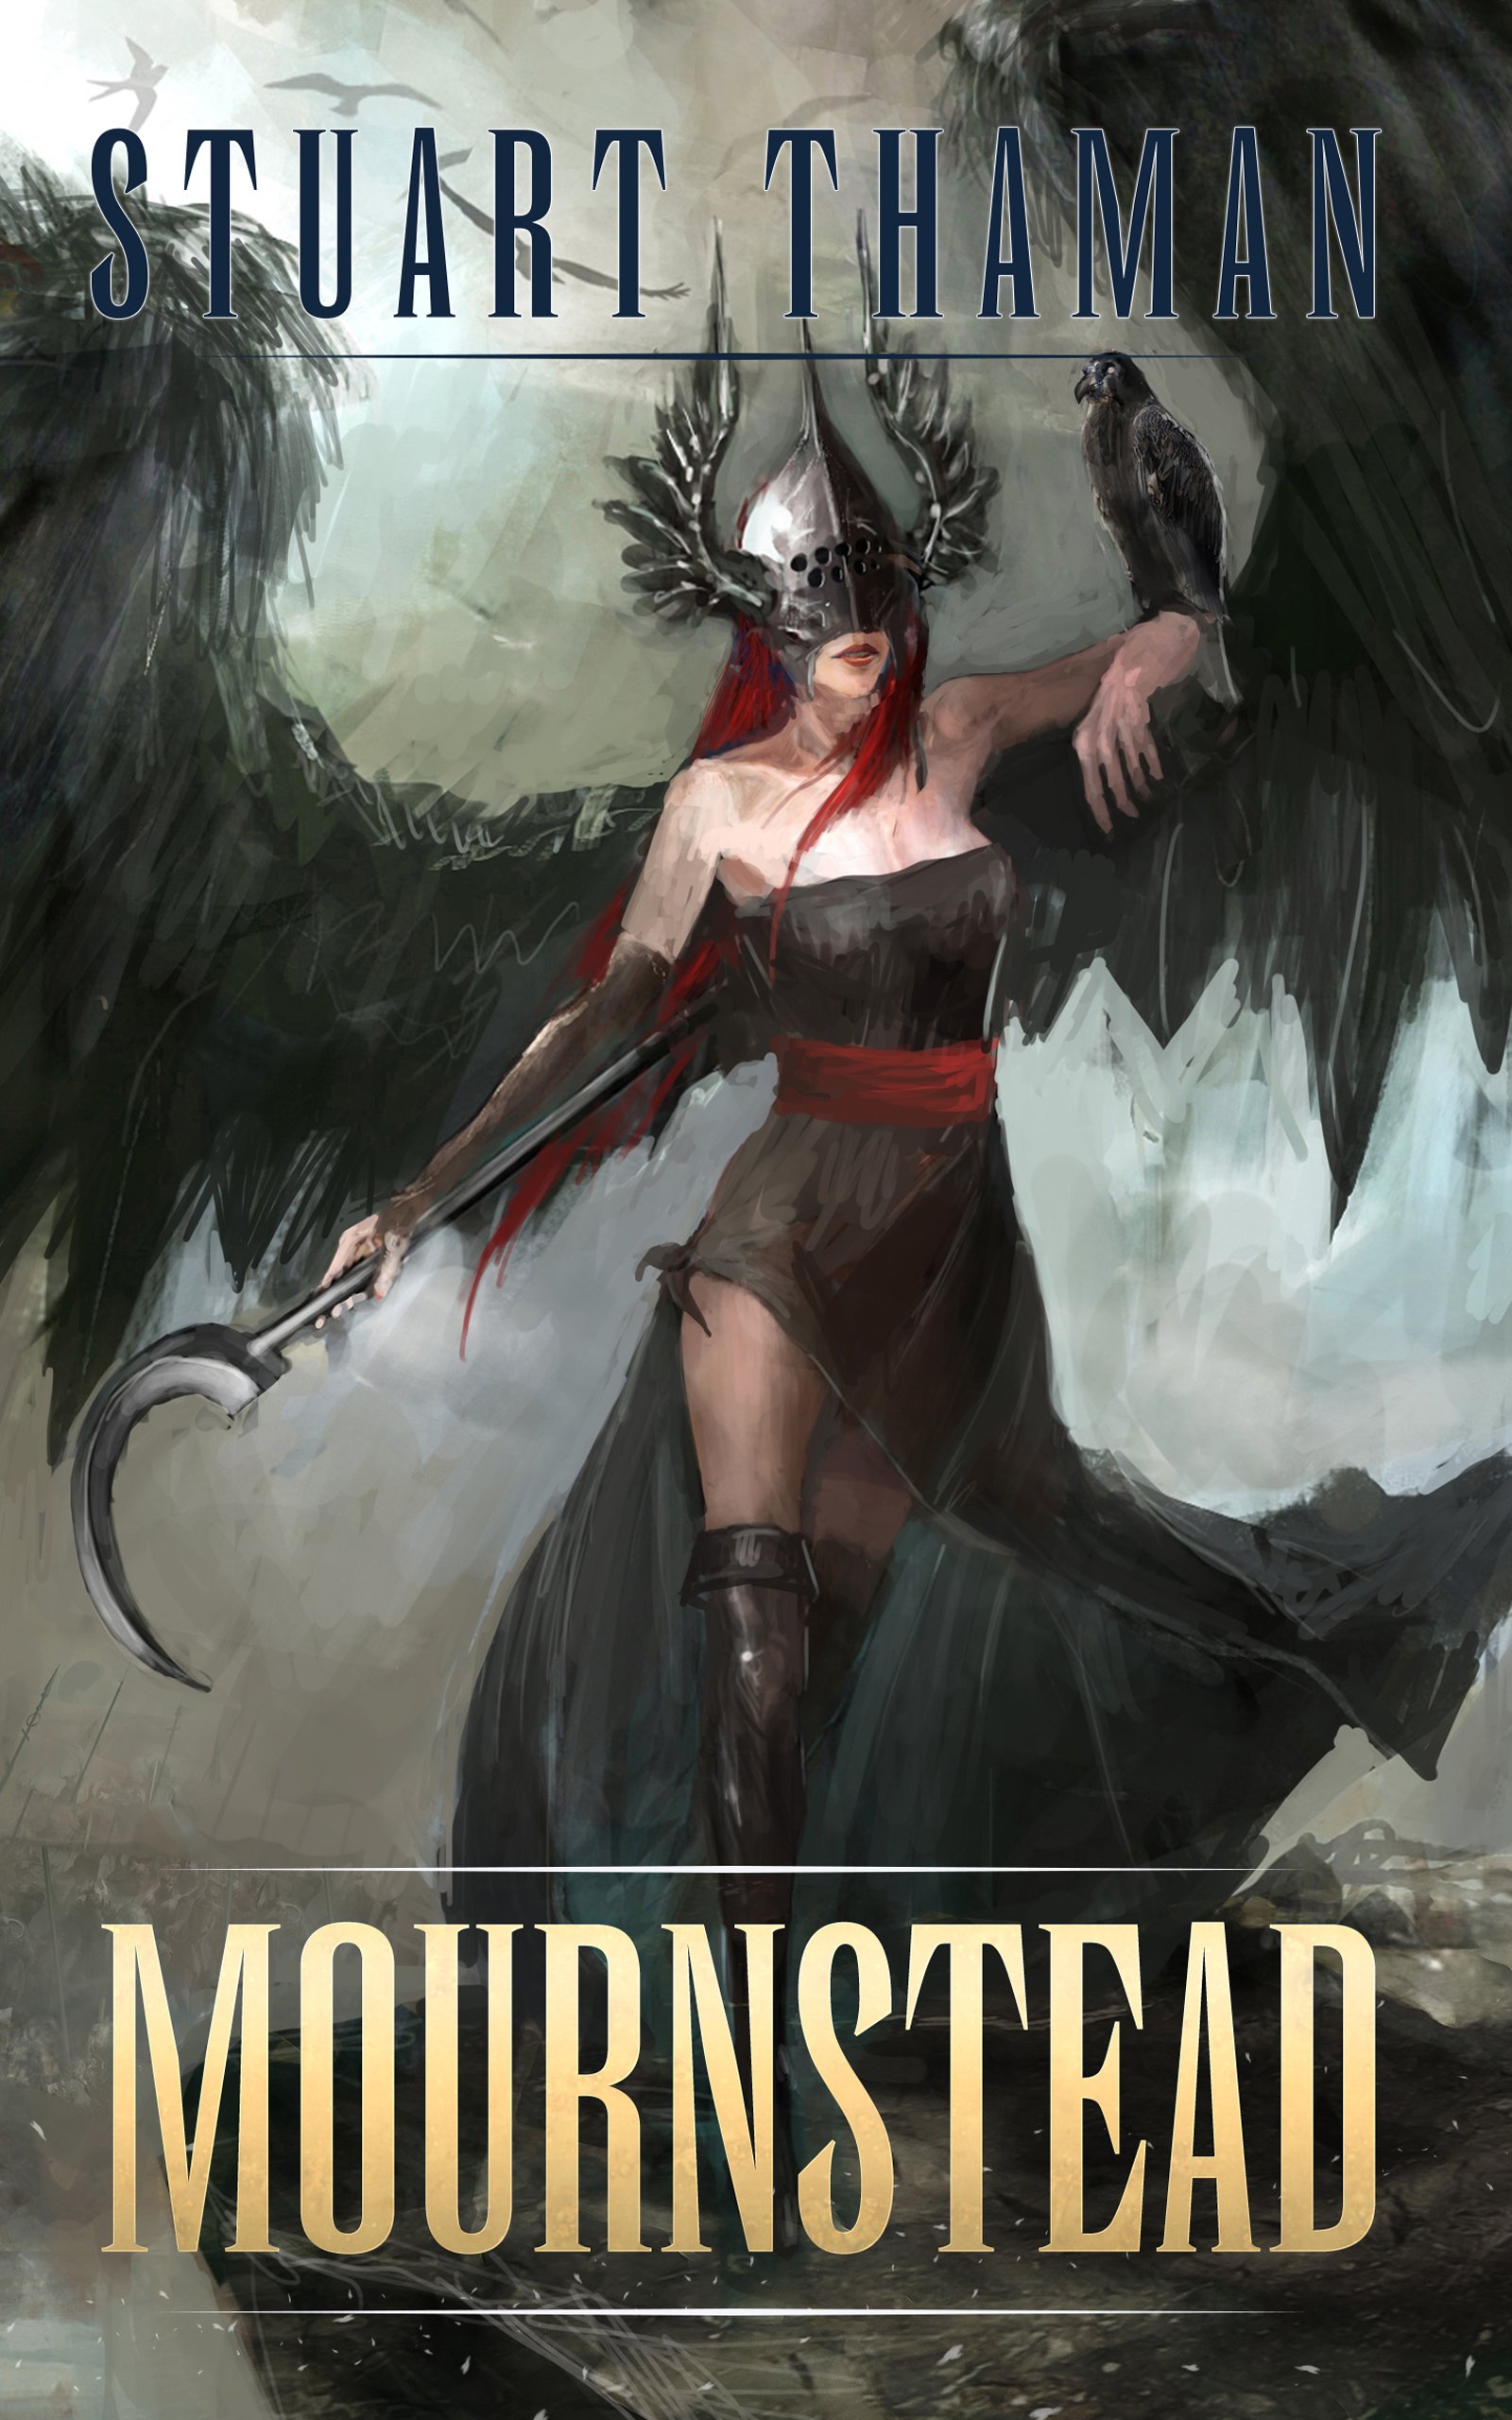 Mournstead - Only $1!